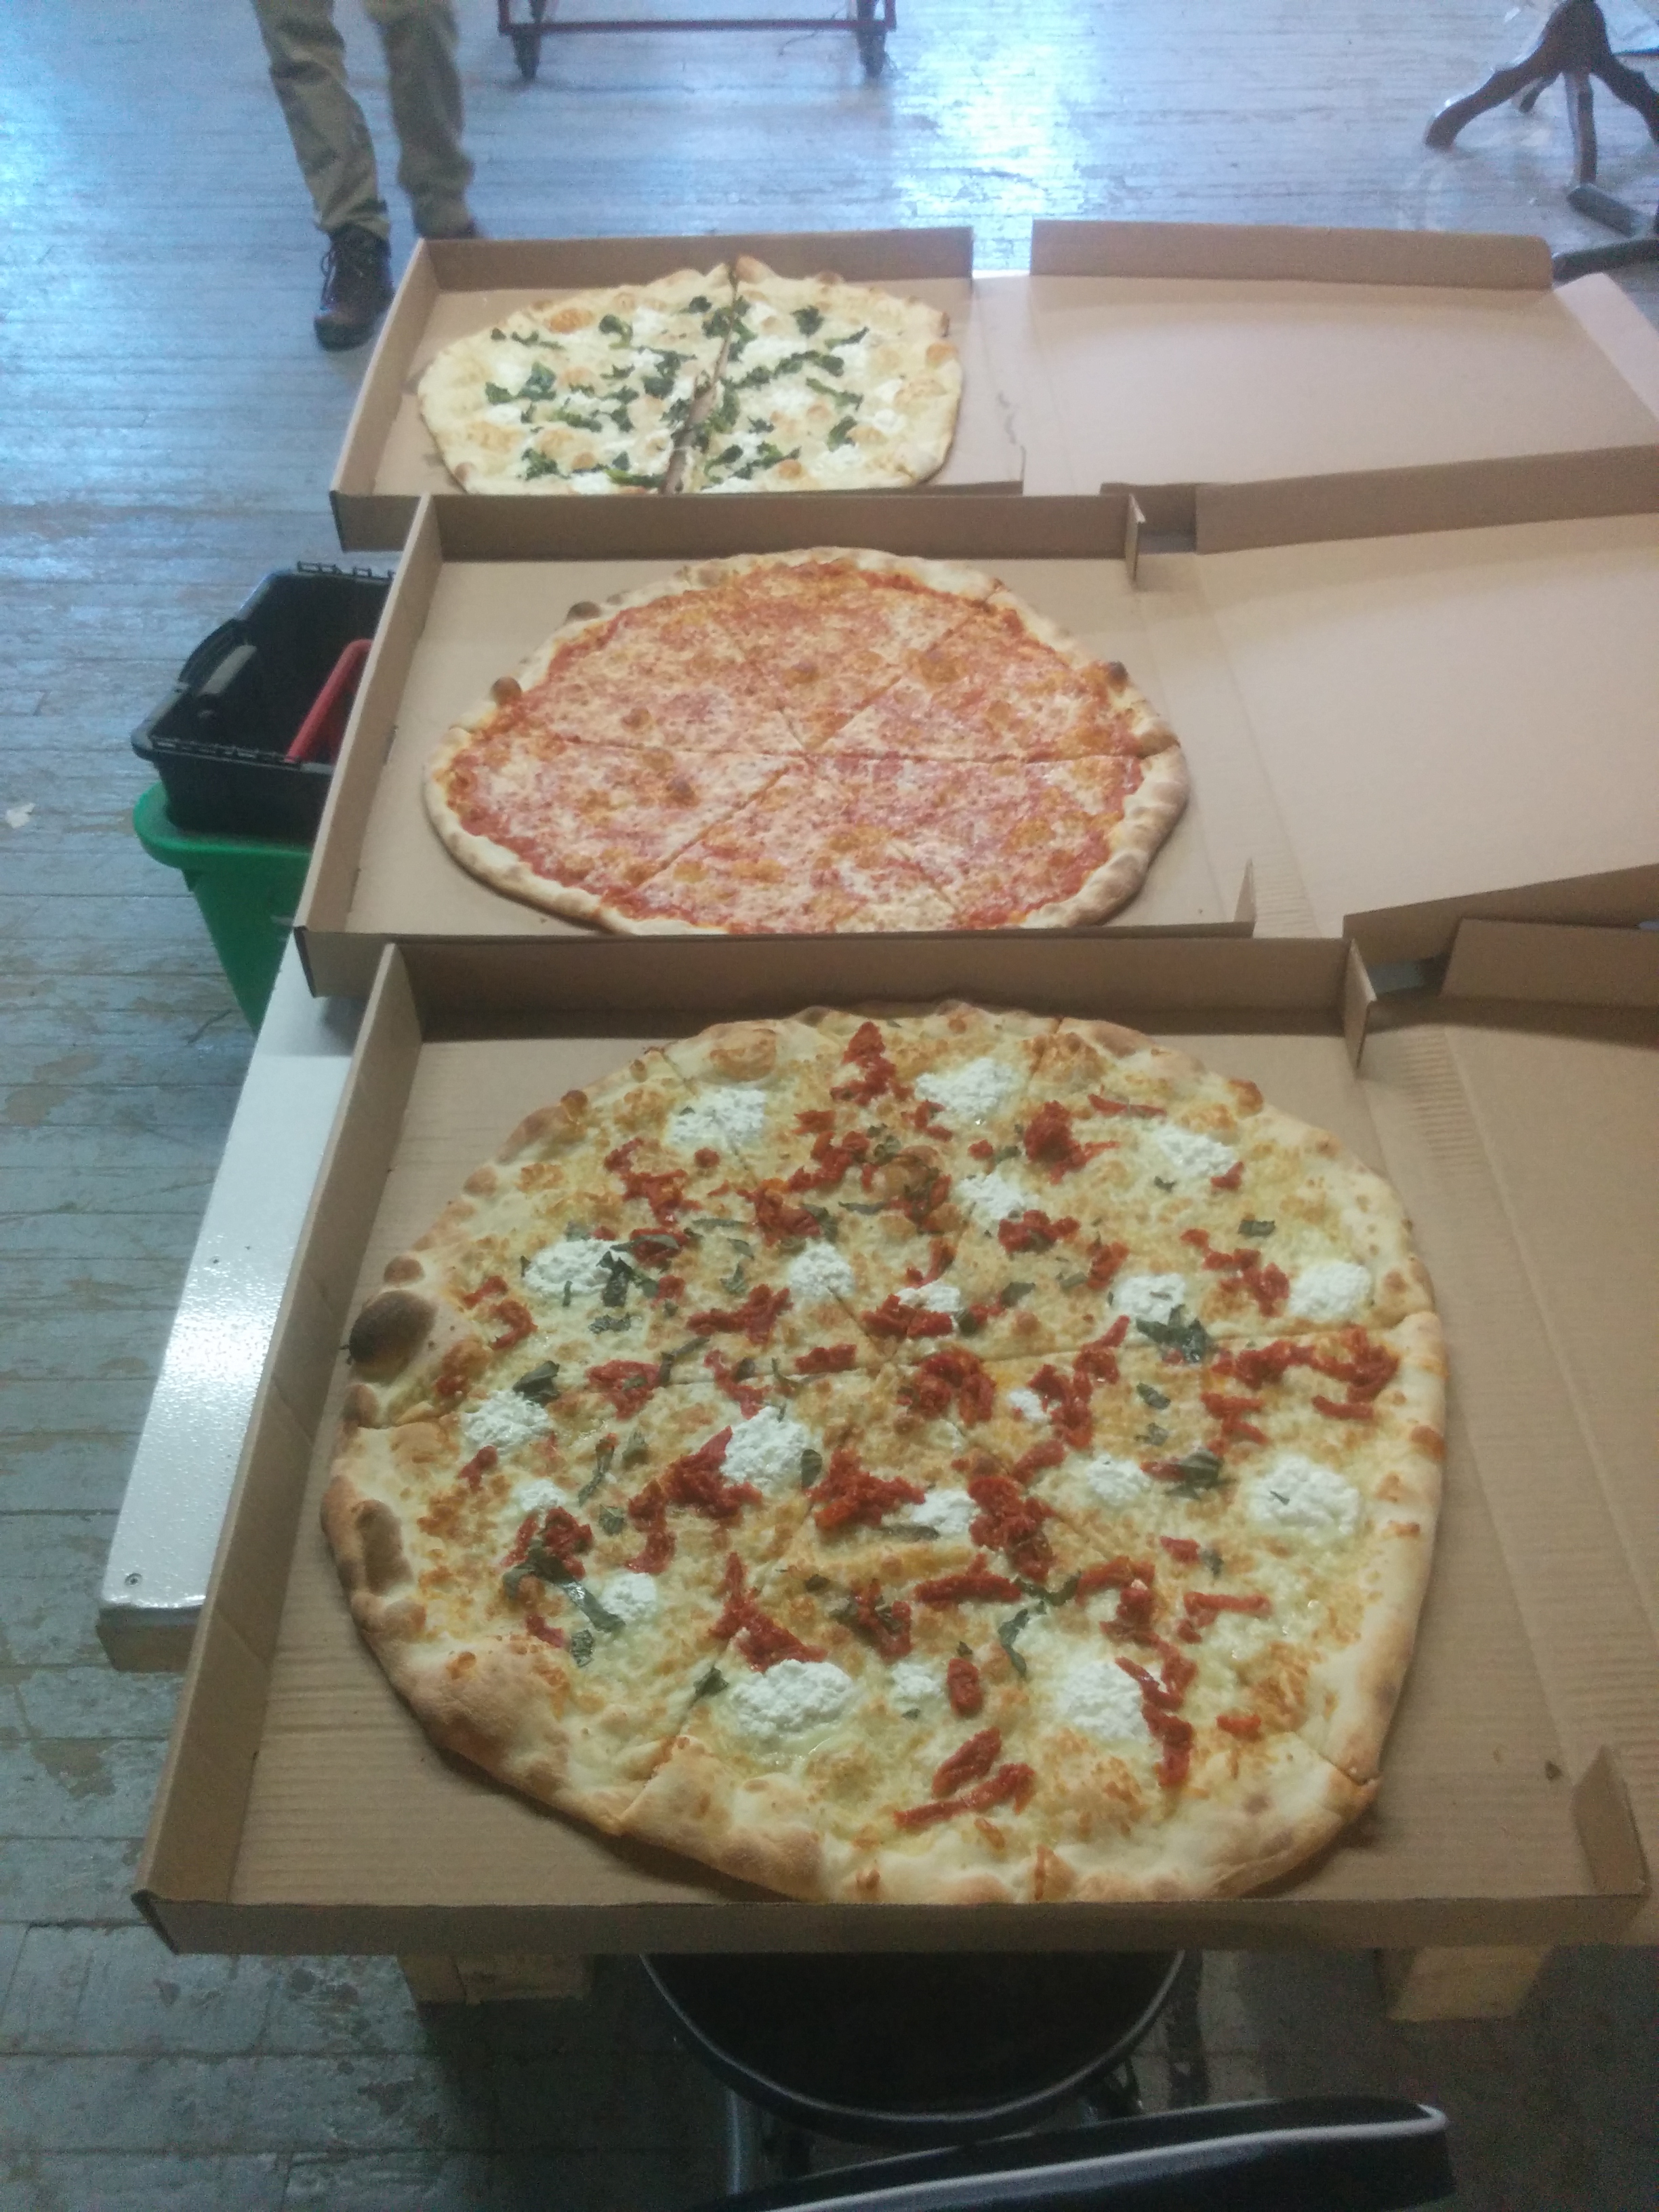 The yummy pizzas we ate for lunch